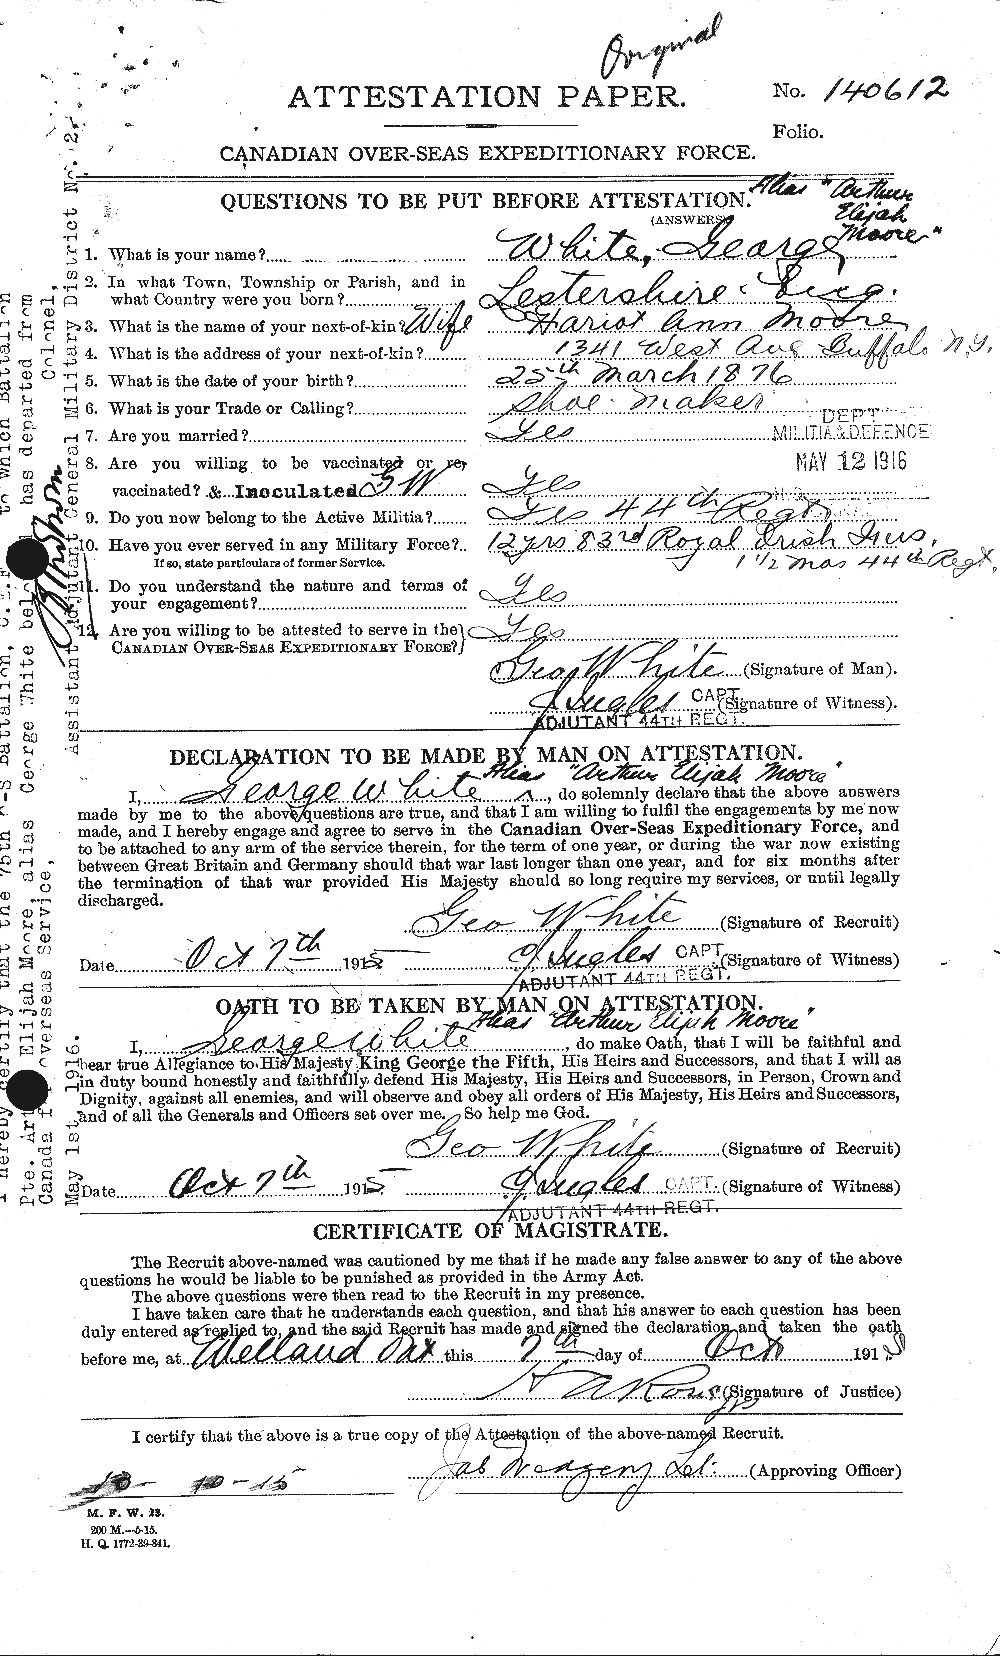 Personnel Records of the First World War - CEF 506440a